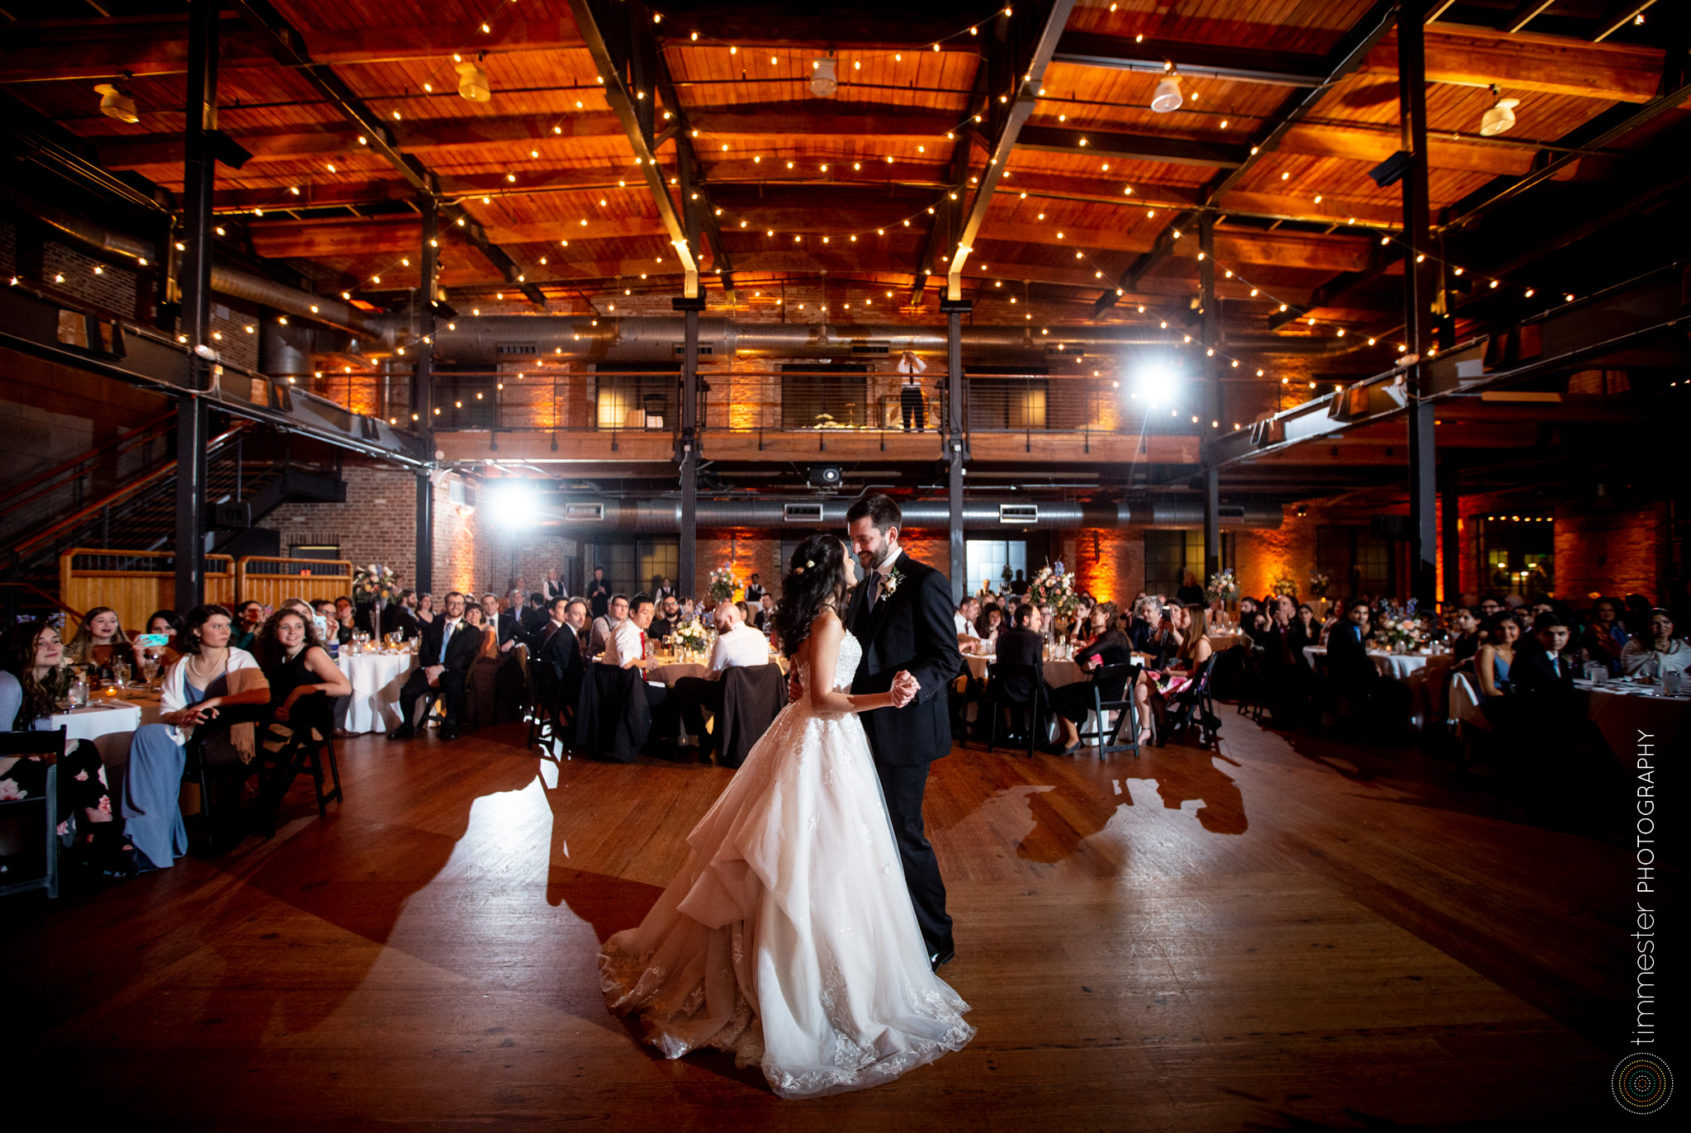 The bride and groom's first dance and reception at Bay 7 in Durham, NC